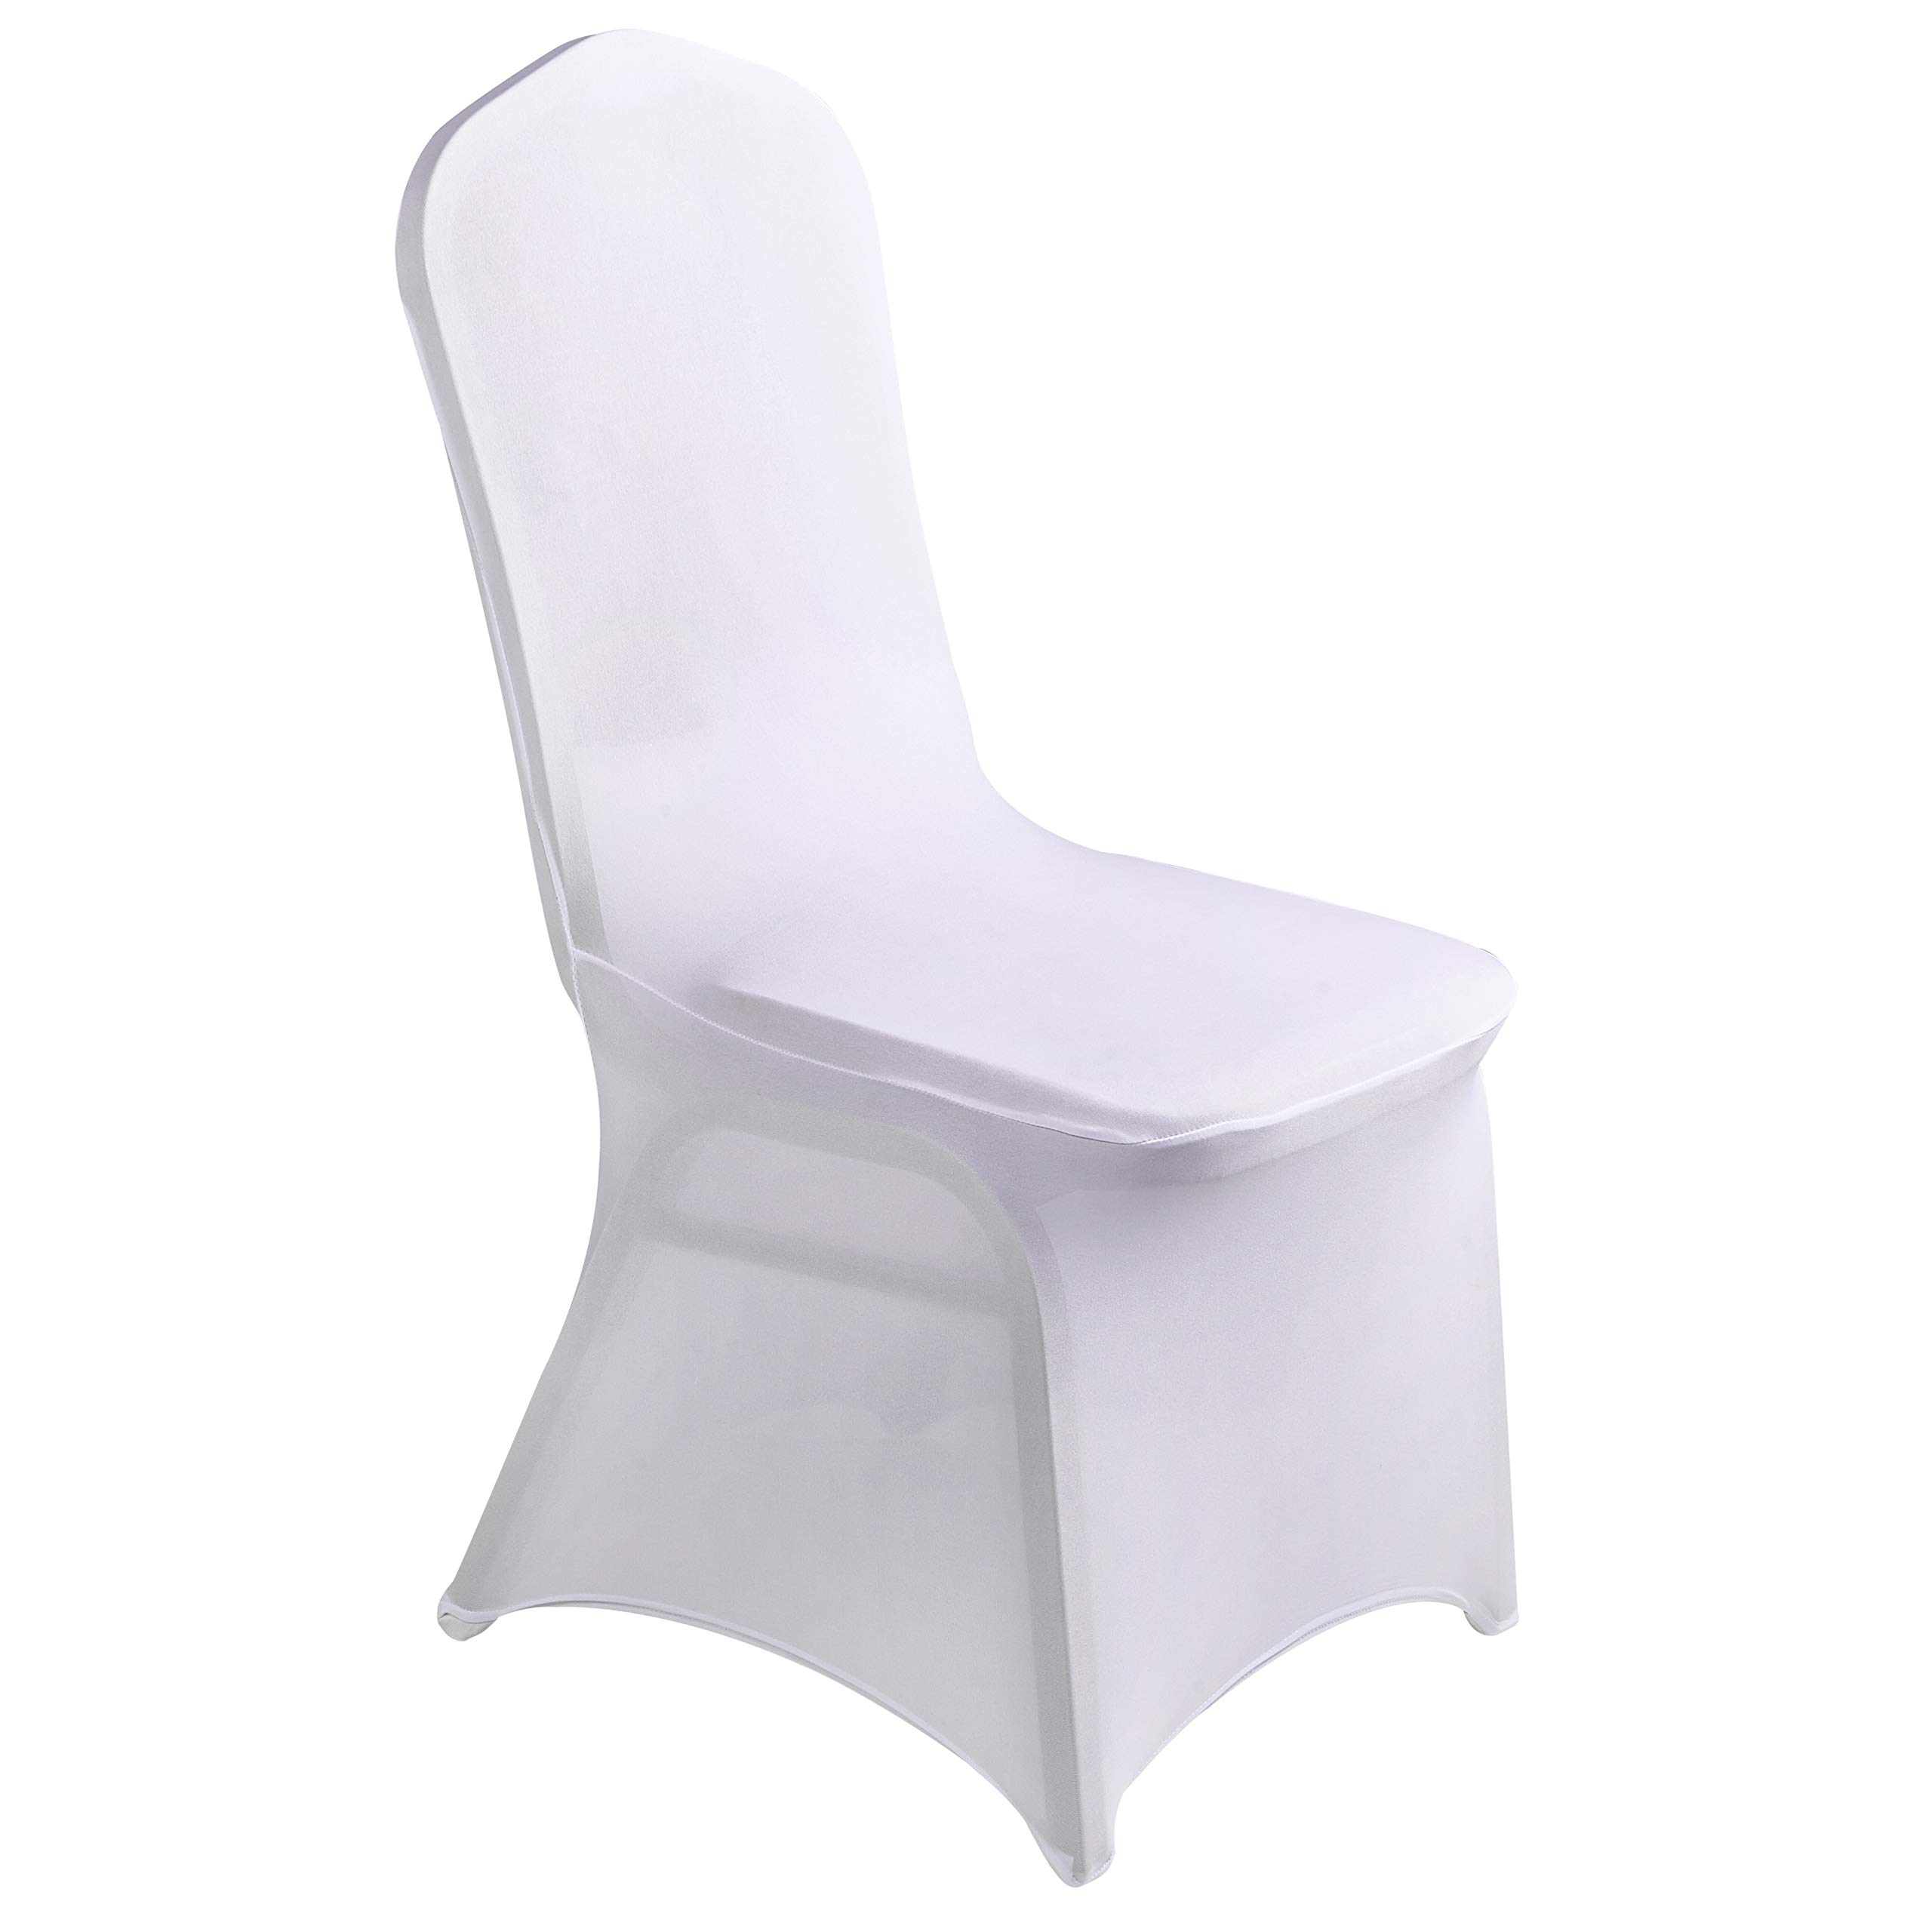 LZY 50pcs Spandex chair cover Stretch Slipcovers for Wedding Party, Dining Banquet chair Decoration covers (White, 50)